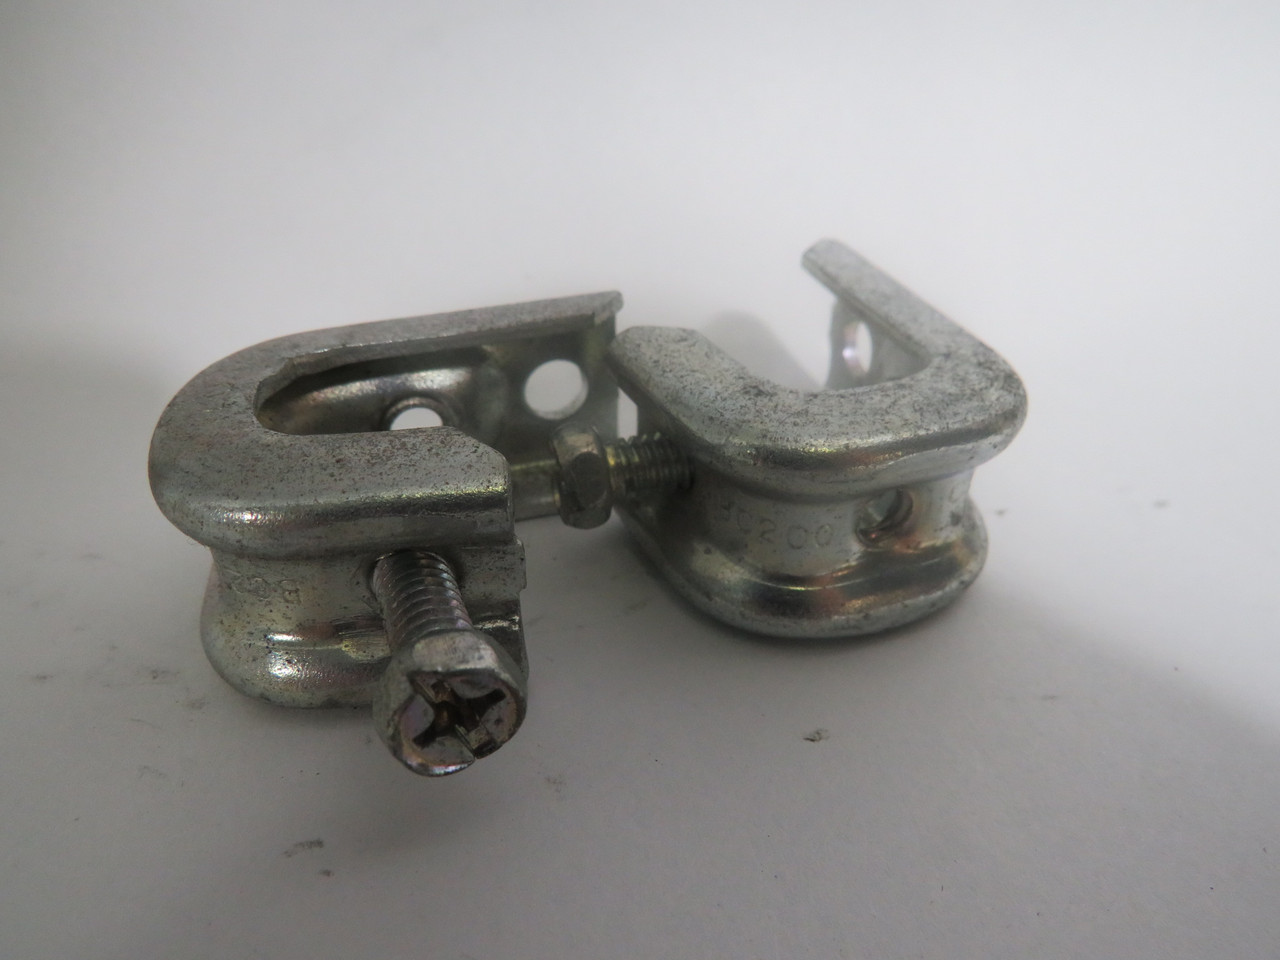 Caddy BC200 1/4" Galvanized Steel Beam Clamp Lot of 2 USED